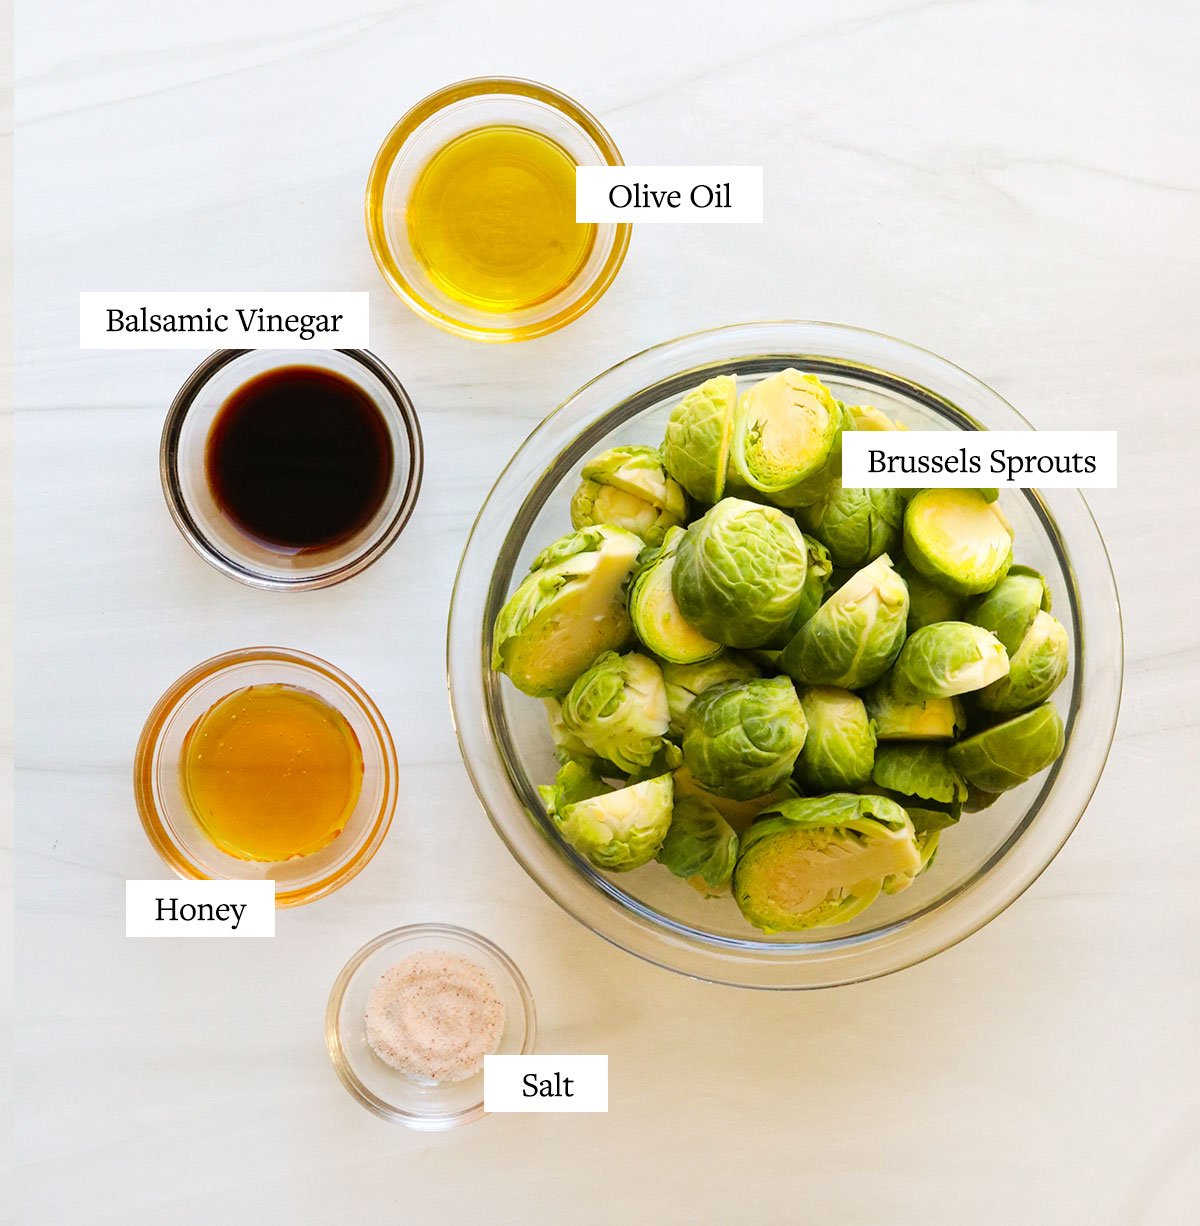 Balsamic brussels sprouts ingredients labeled on a white surface.